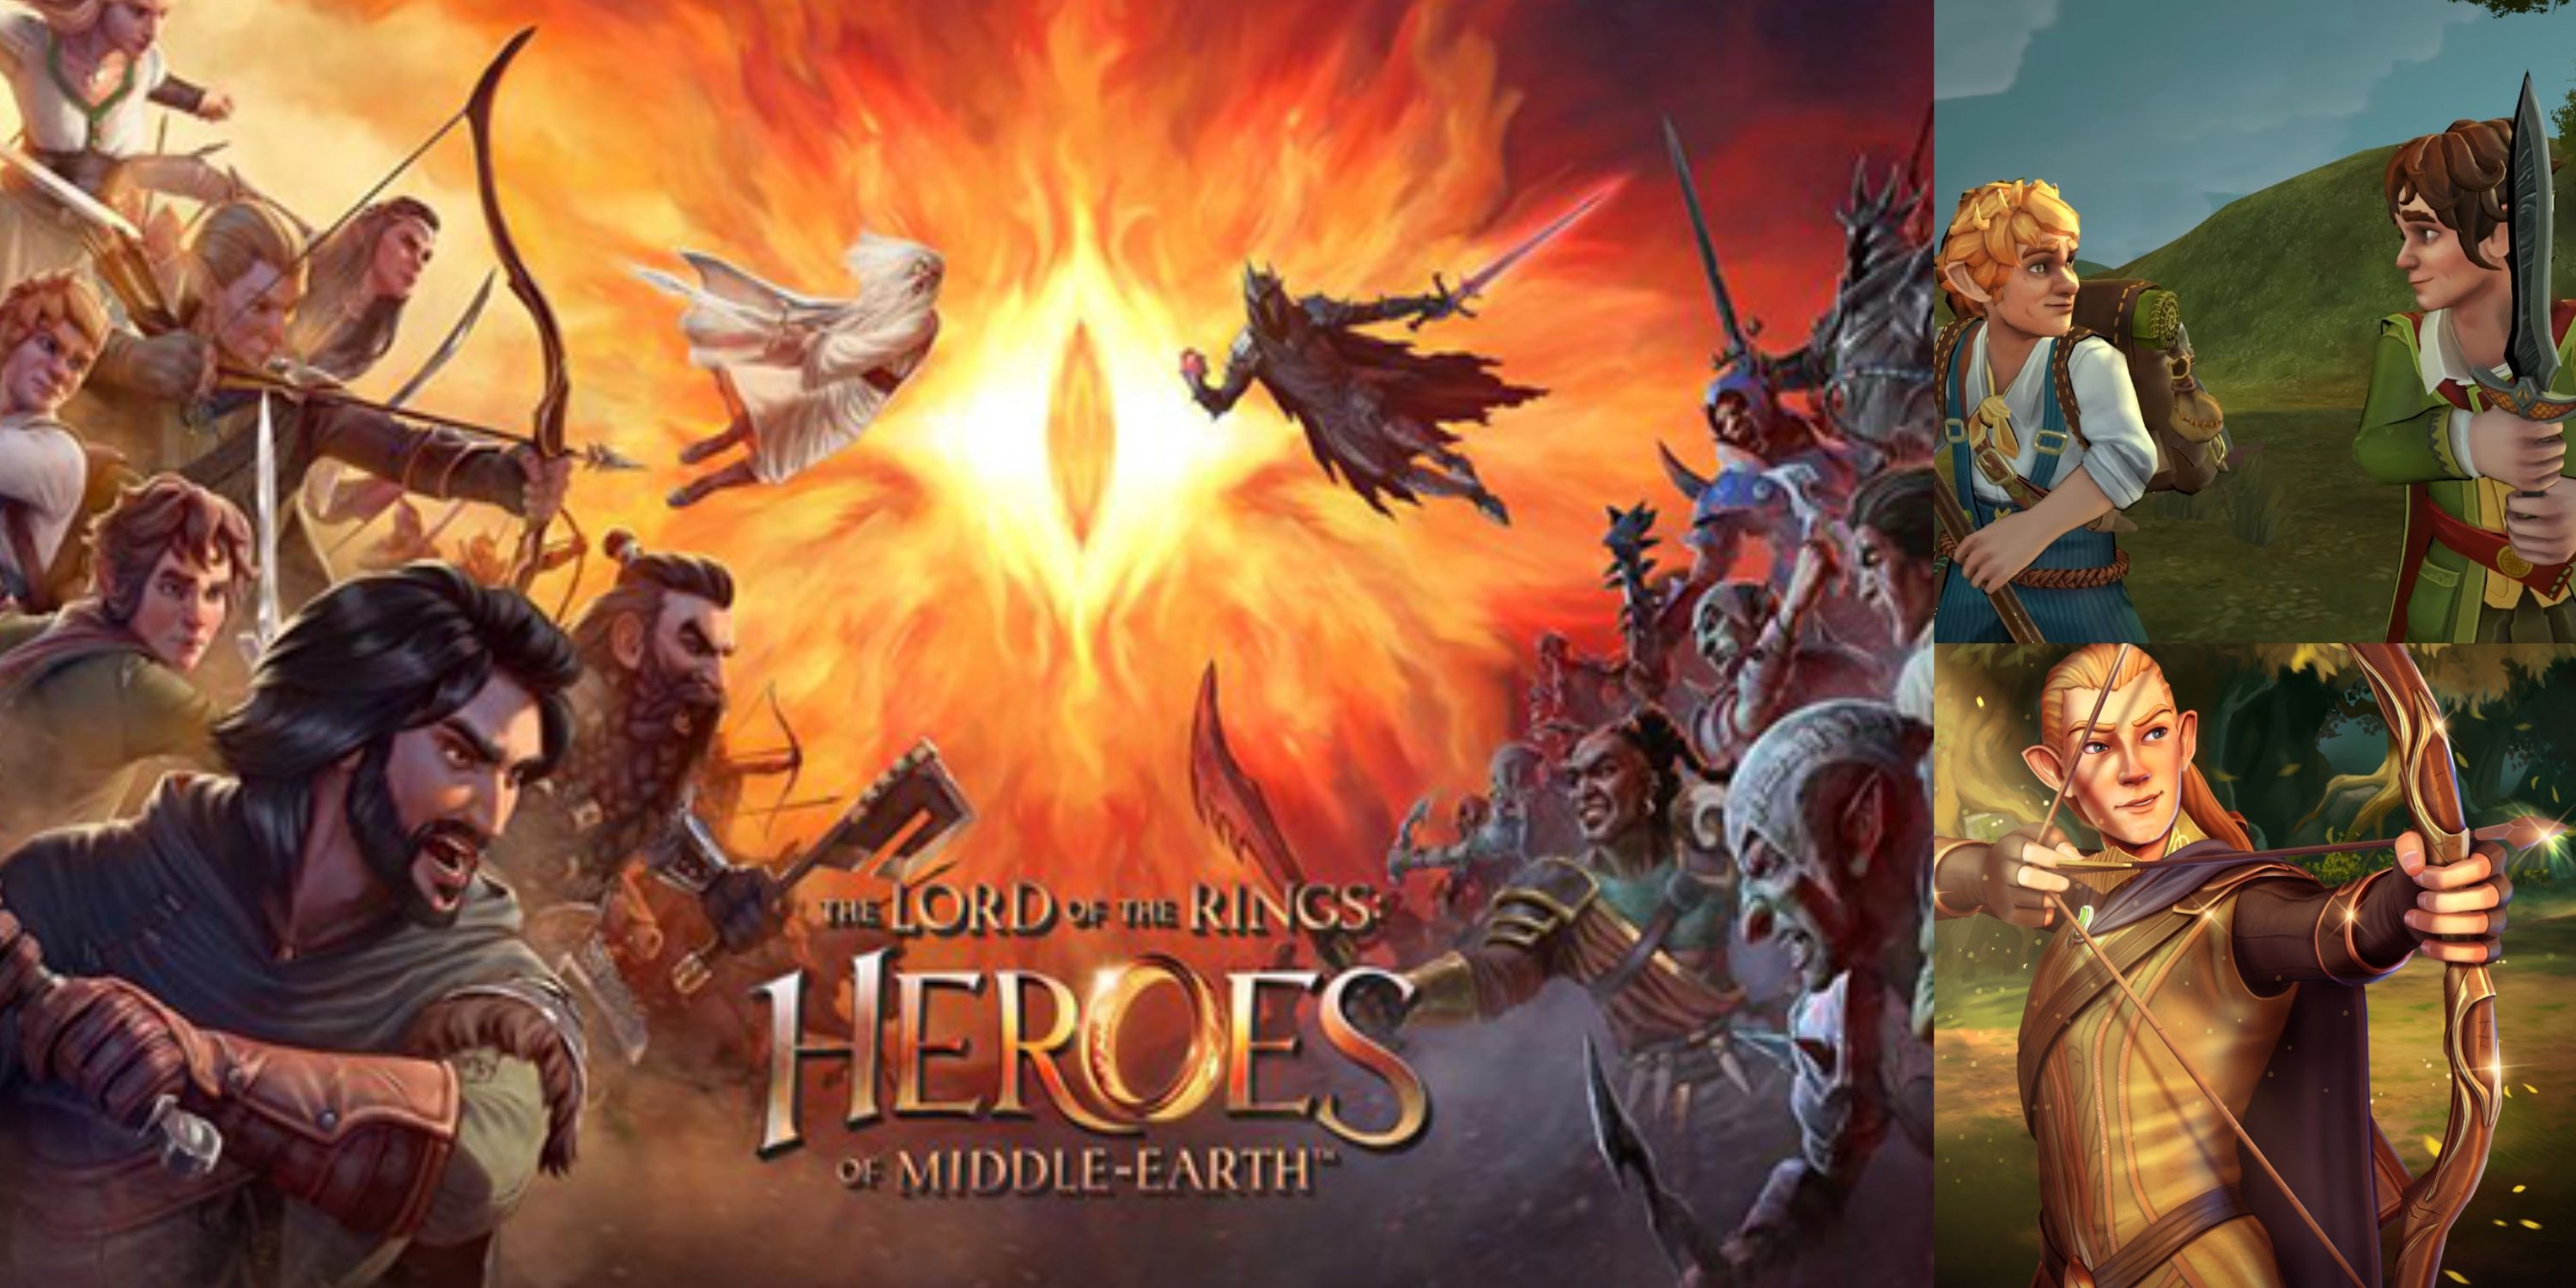 heroes_of_middle_Earth cover art and screenshots of Legolas, frodo and sam